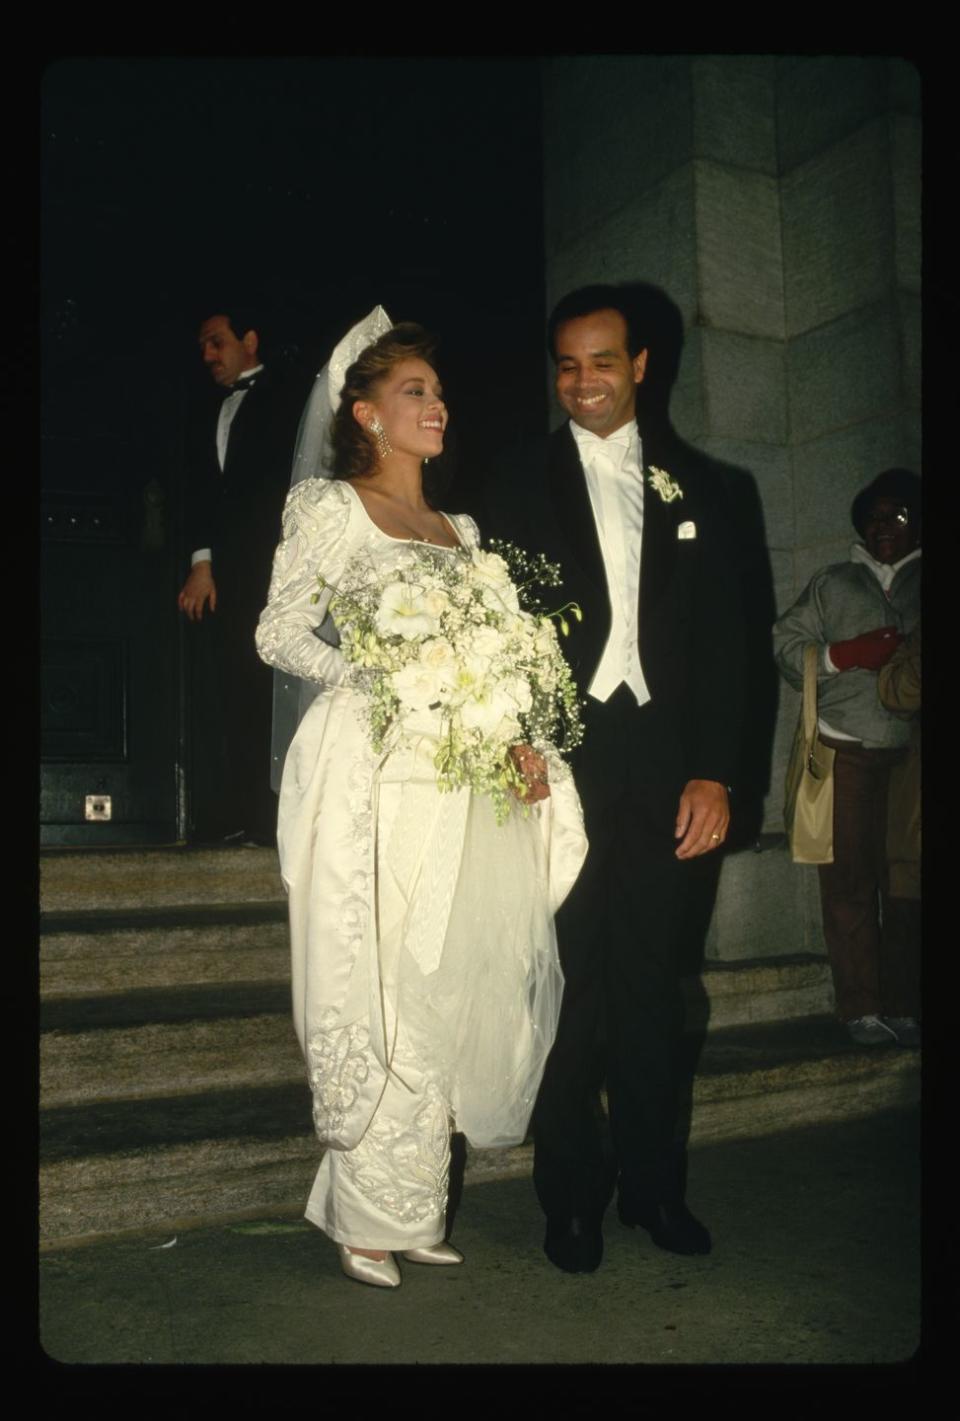 <p>Ramon Hervey II, a public relations specialist, was hired to save Vanessa Williams's career after publicized nude photos of her forced her to resign as Miss America in 1984. The two married on January 2, 1987. The couple had three children and divorced in 1997. Williams would remarry twice.</p>